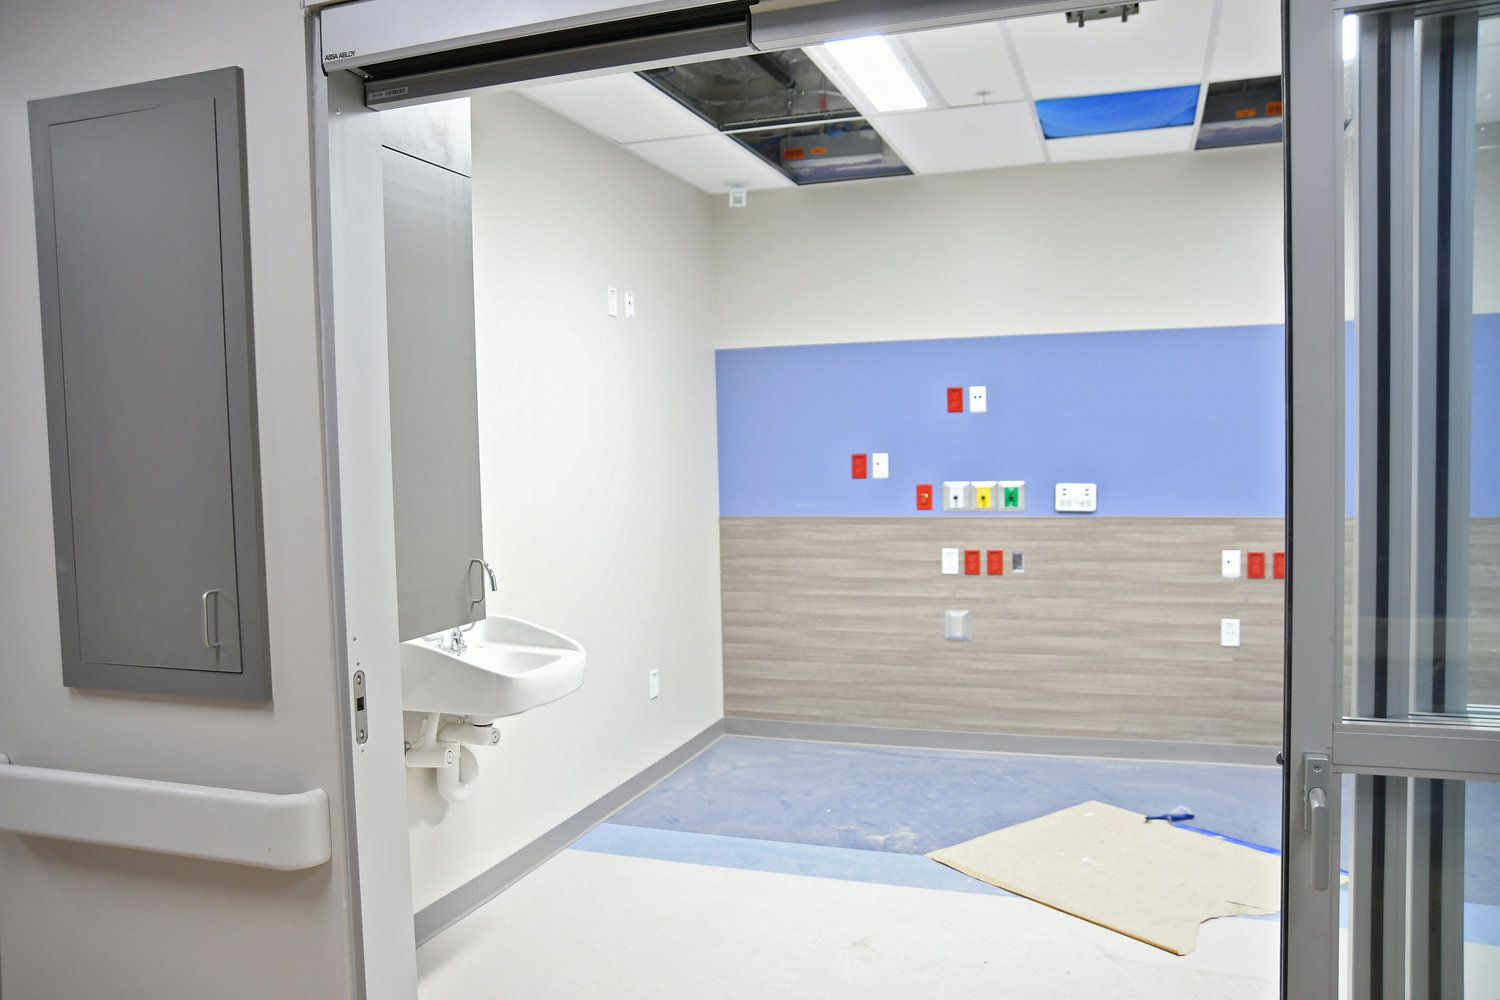 The Emergency Department (ED) will be designed with 47 ED treatment spaces (ED exam, quick turn, trauma), six behavioral health ED treatment rooms and 10 observation beds.